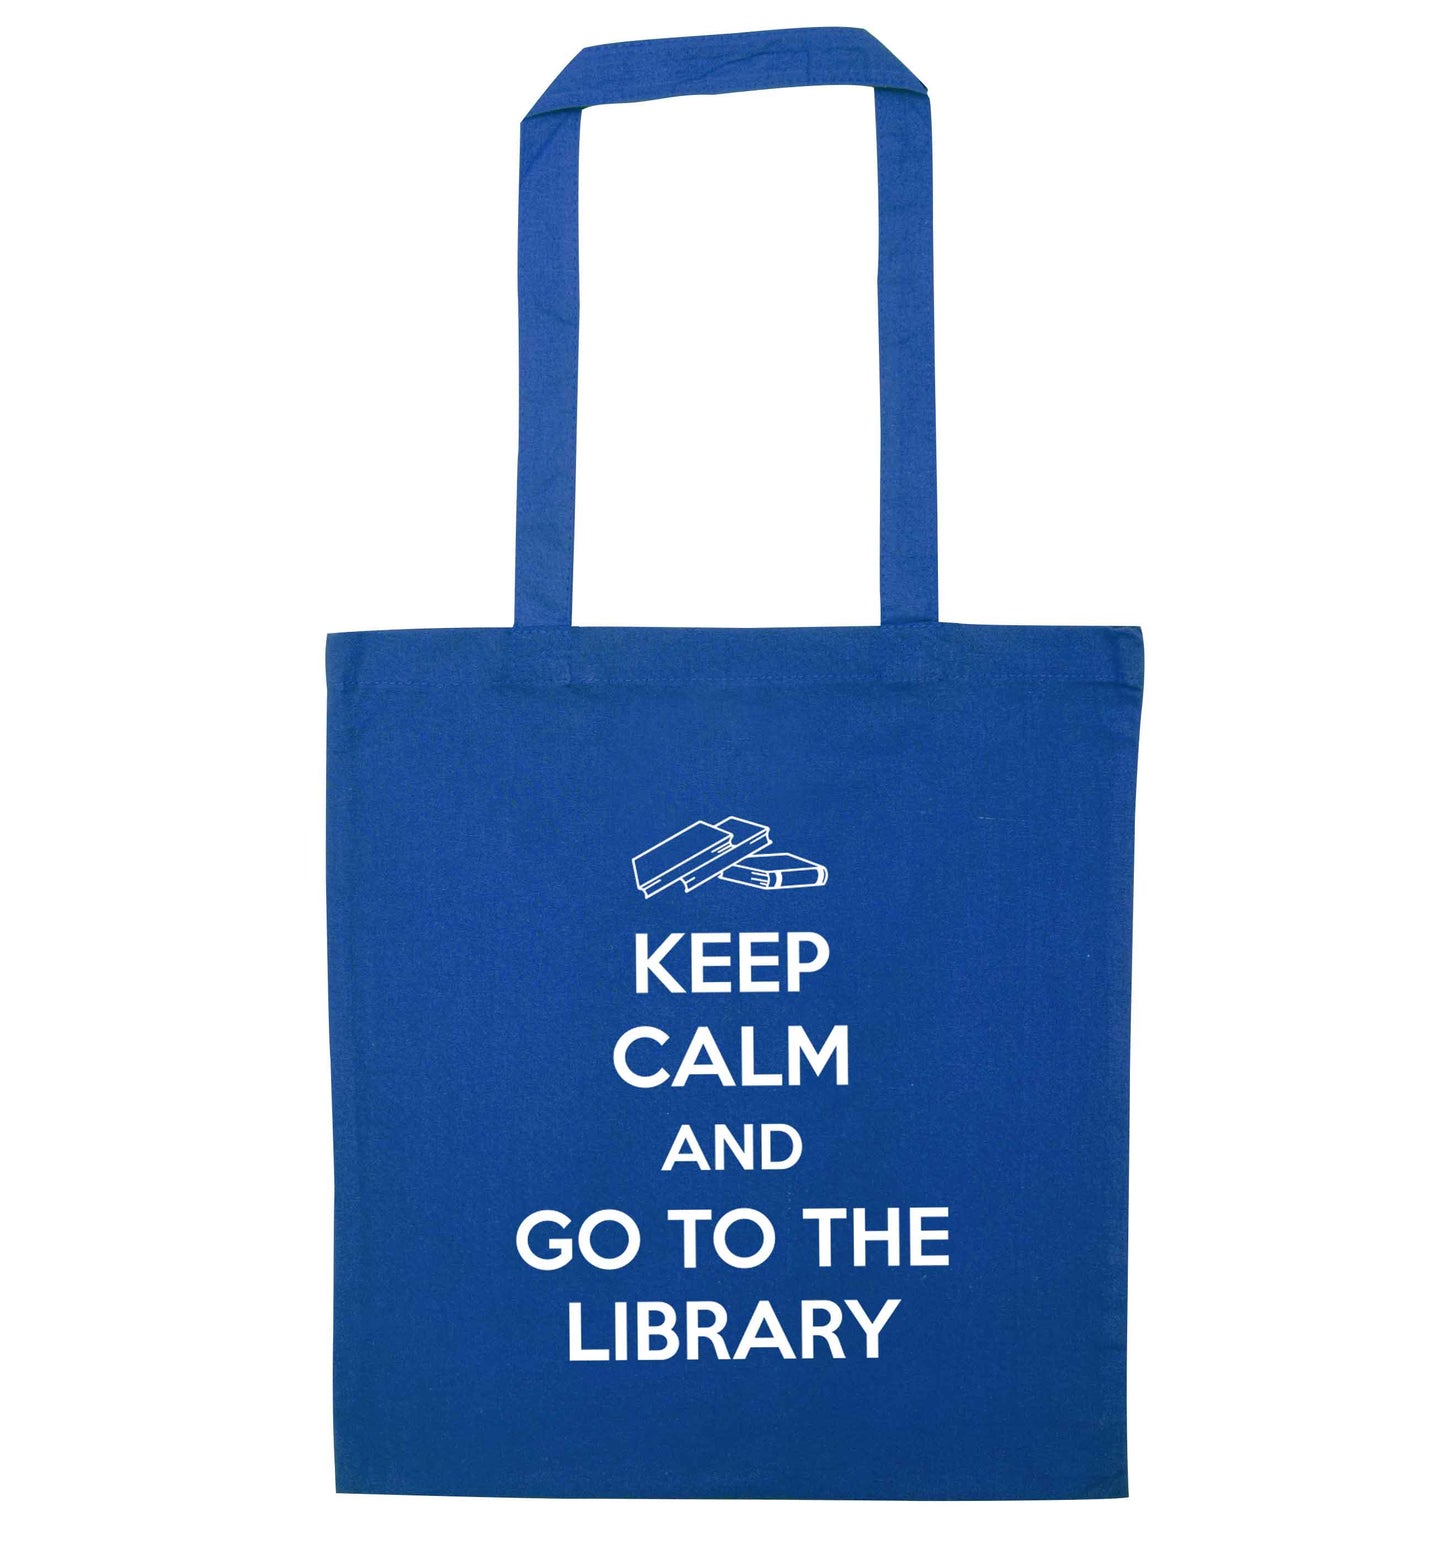 Keep calm and go to the library blue tote bag